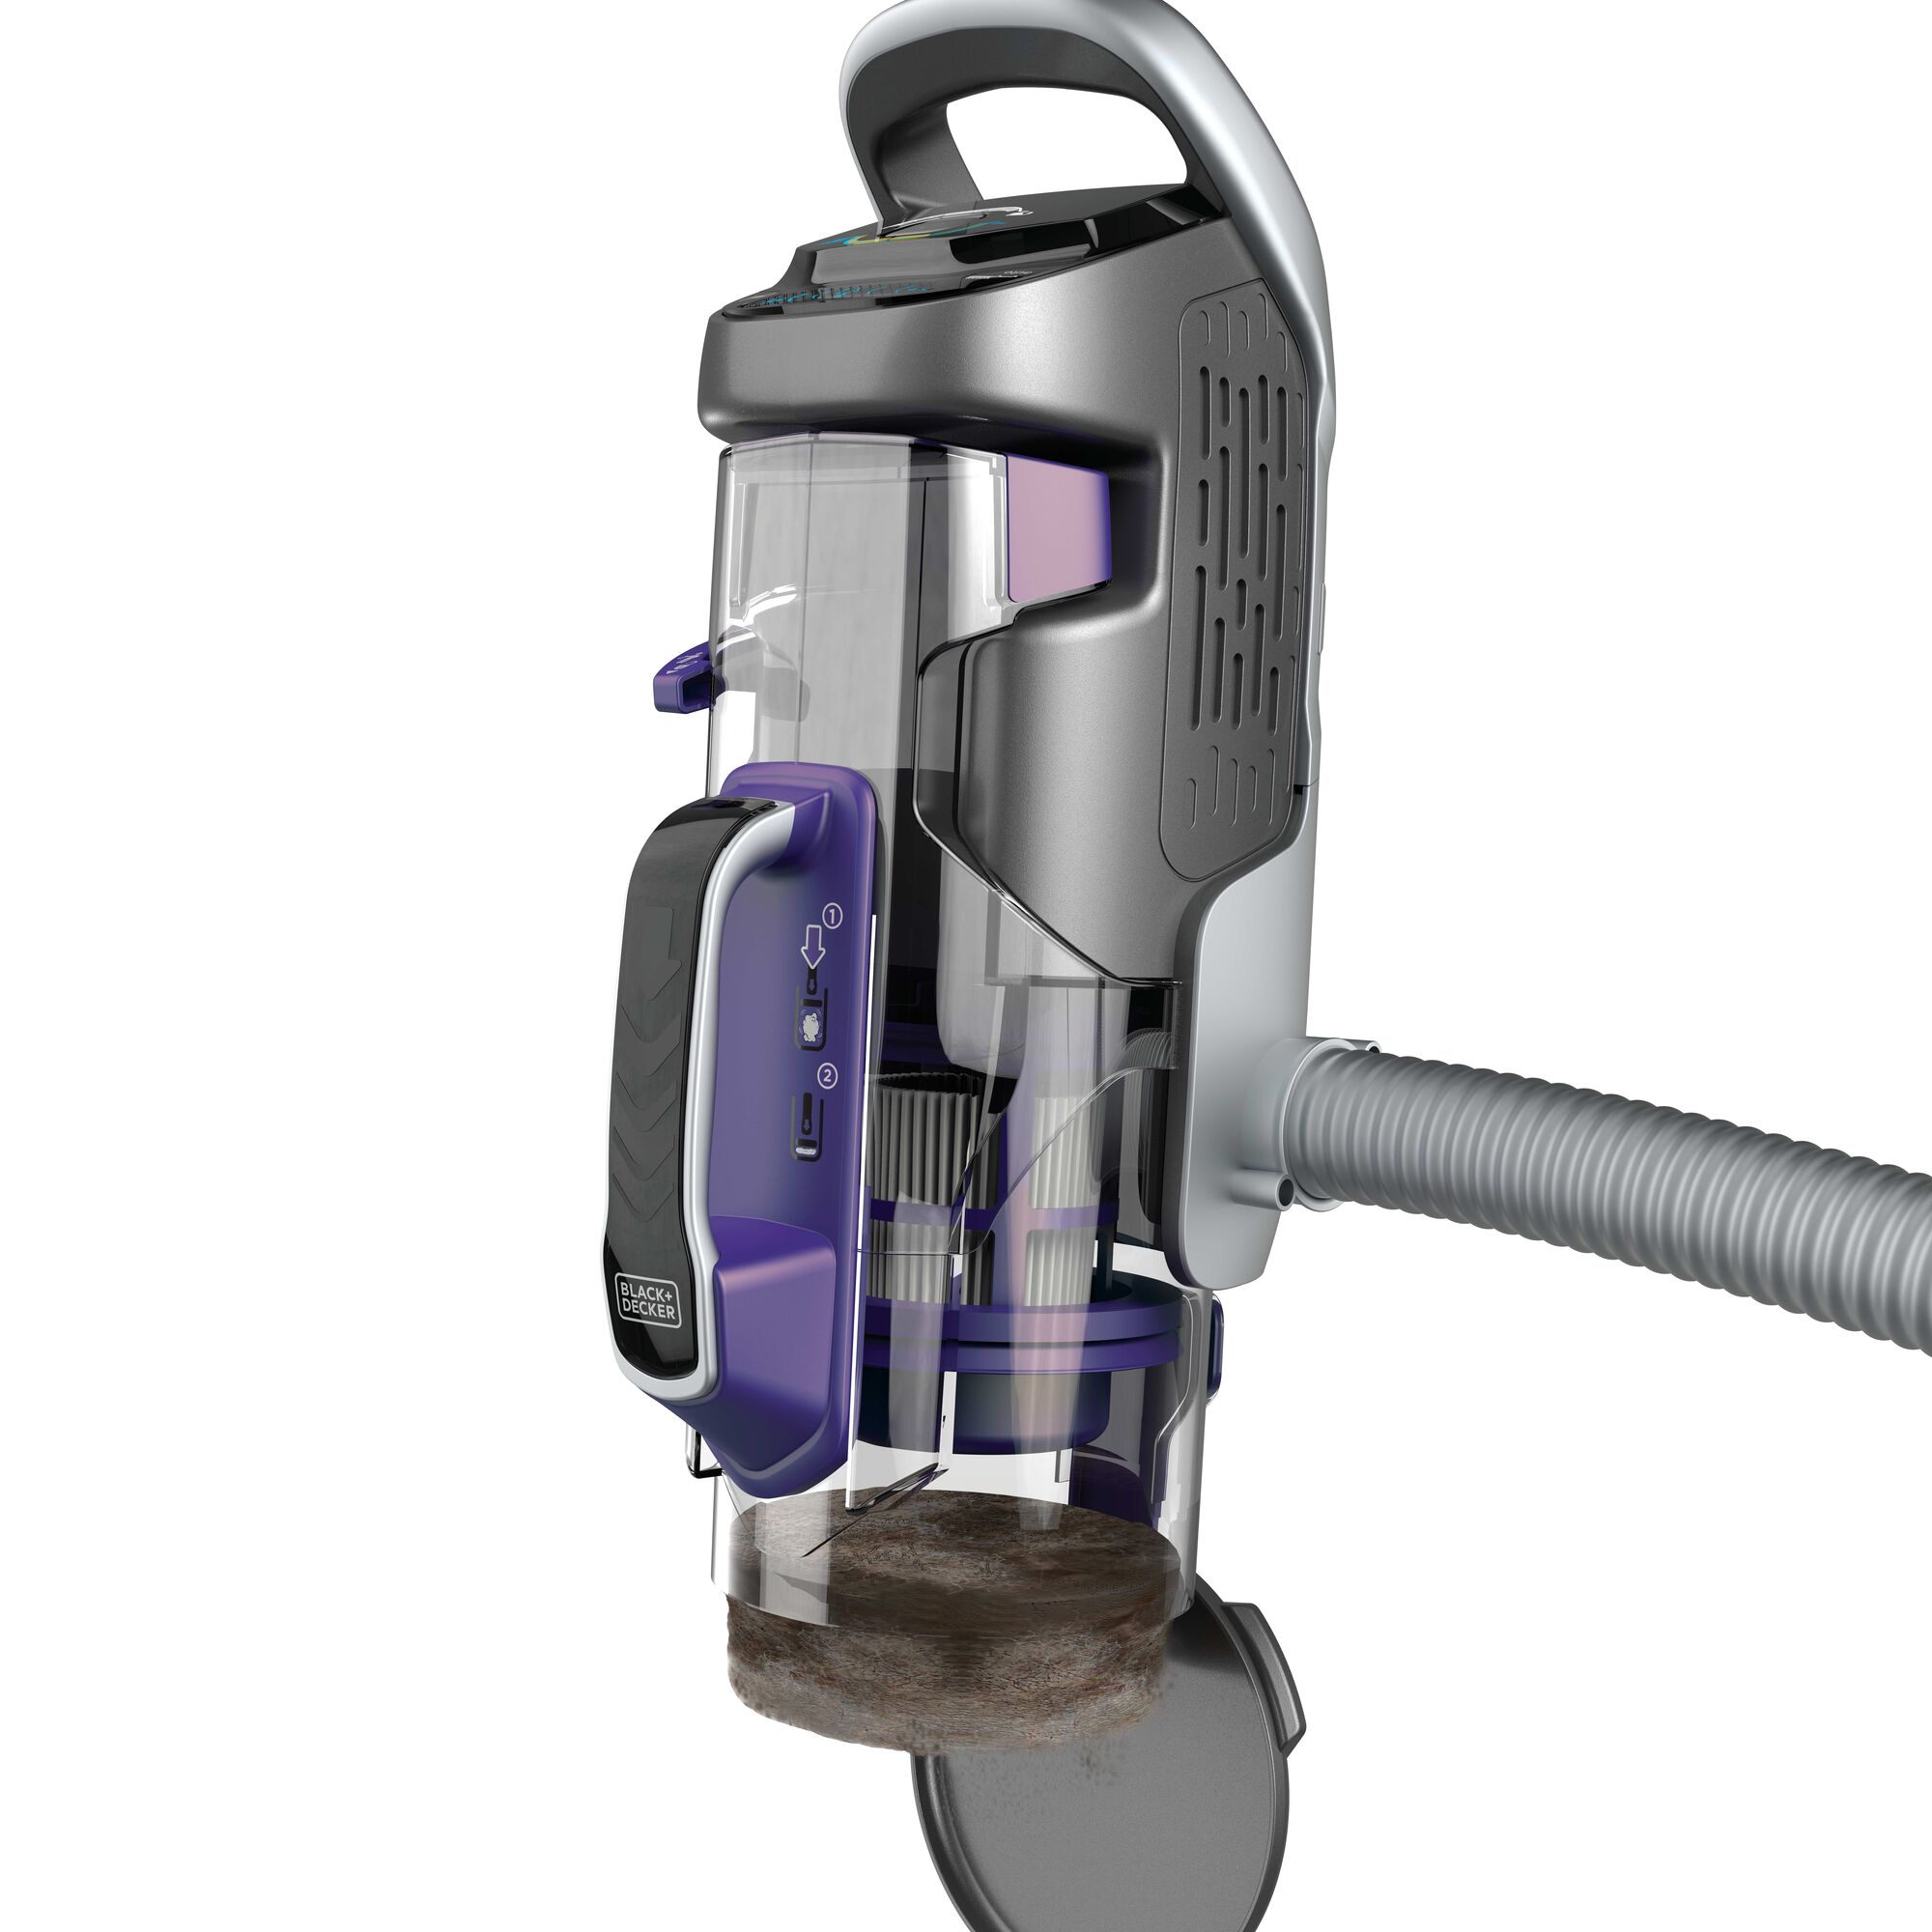 Removable container for easy clean up of a power series pro cordless 2 in 1 pet vacuum.